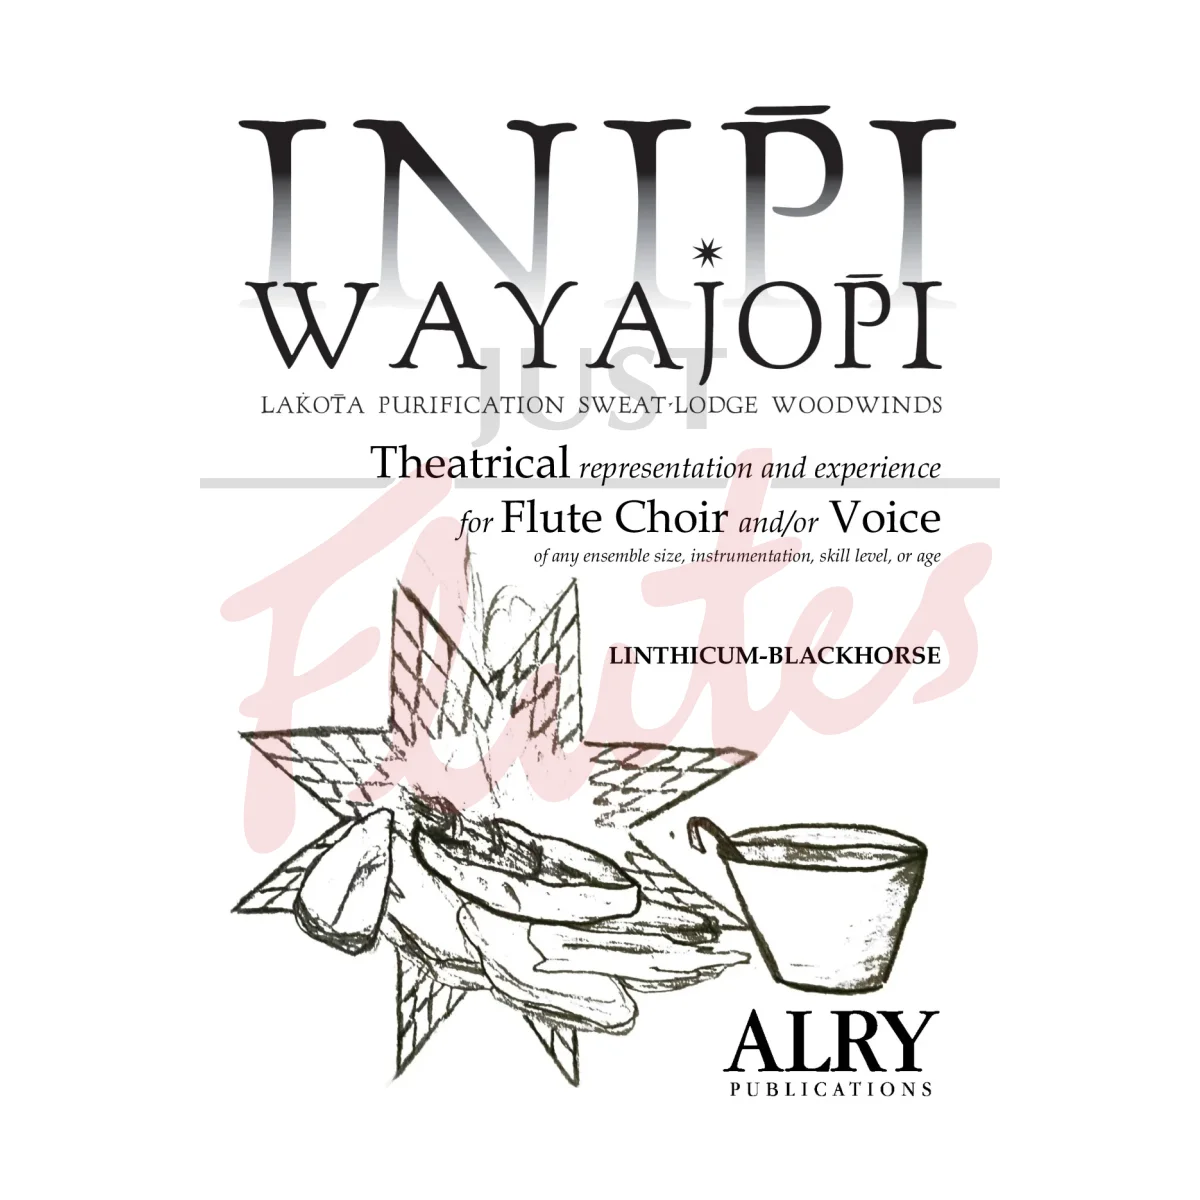 Inipi Wayajopi for Flute Choir and/or Voice